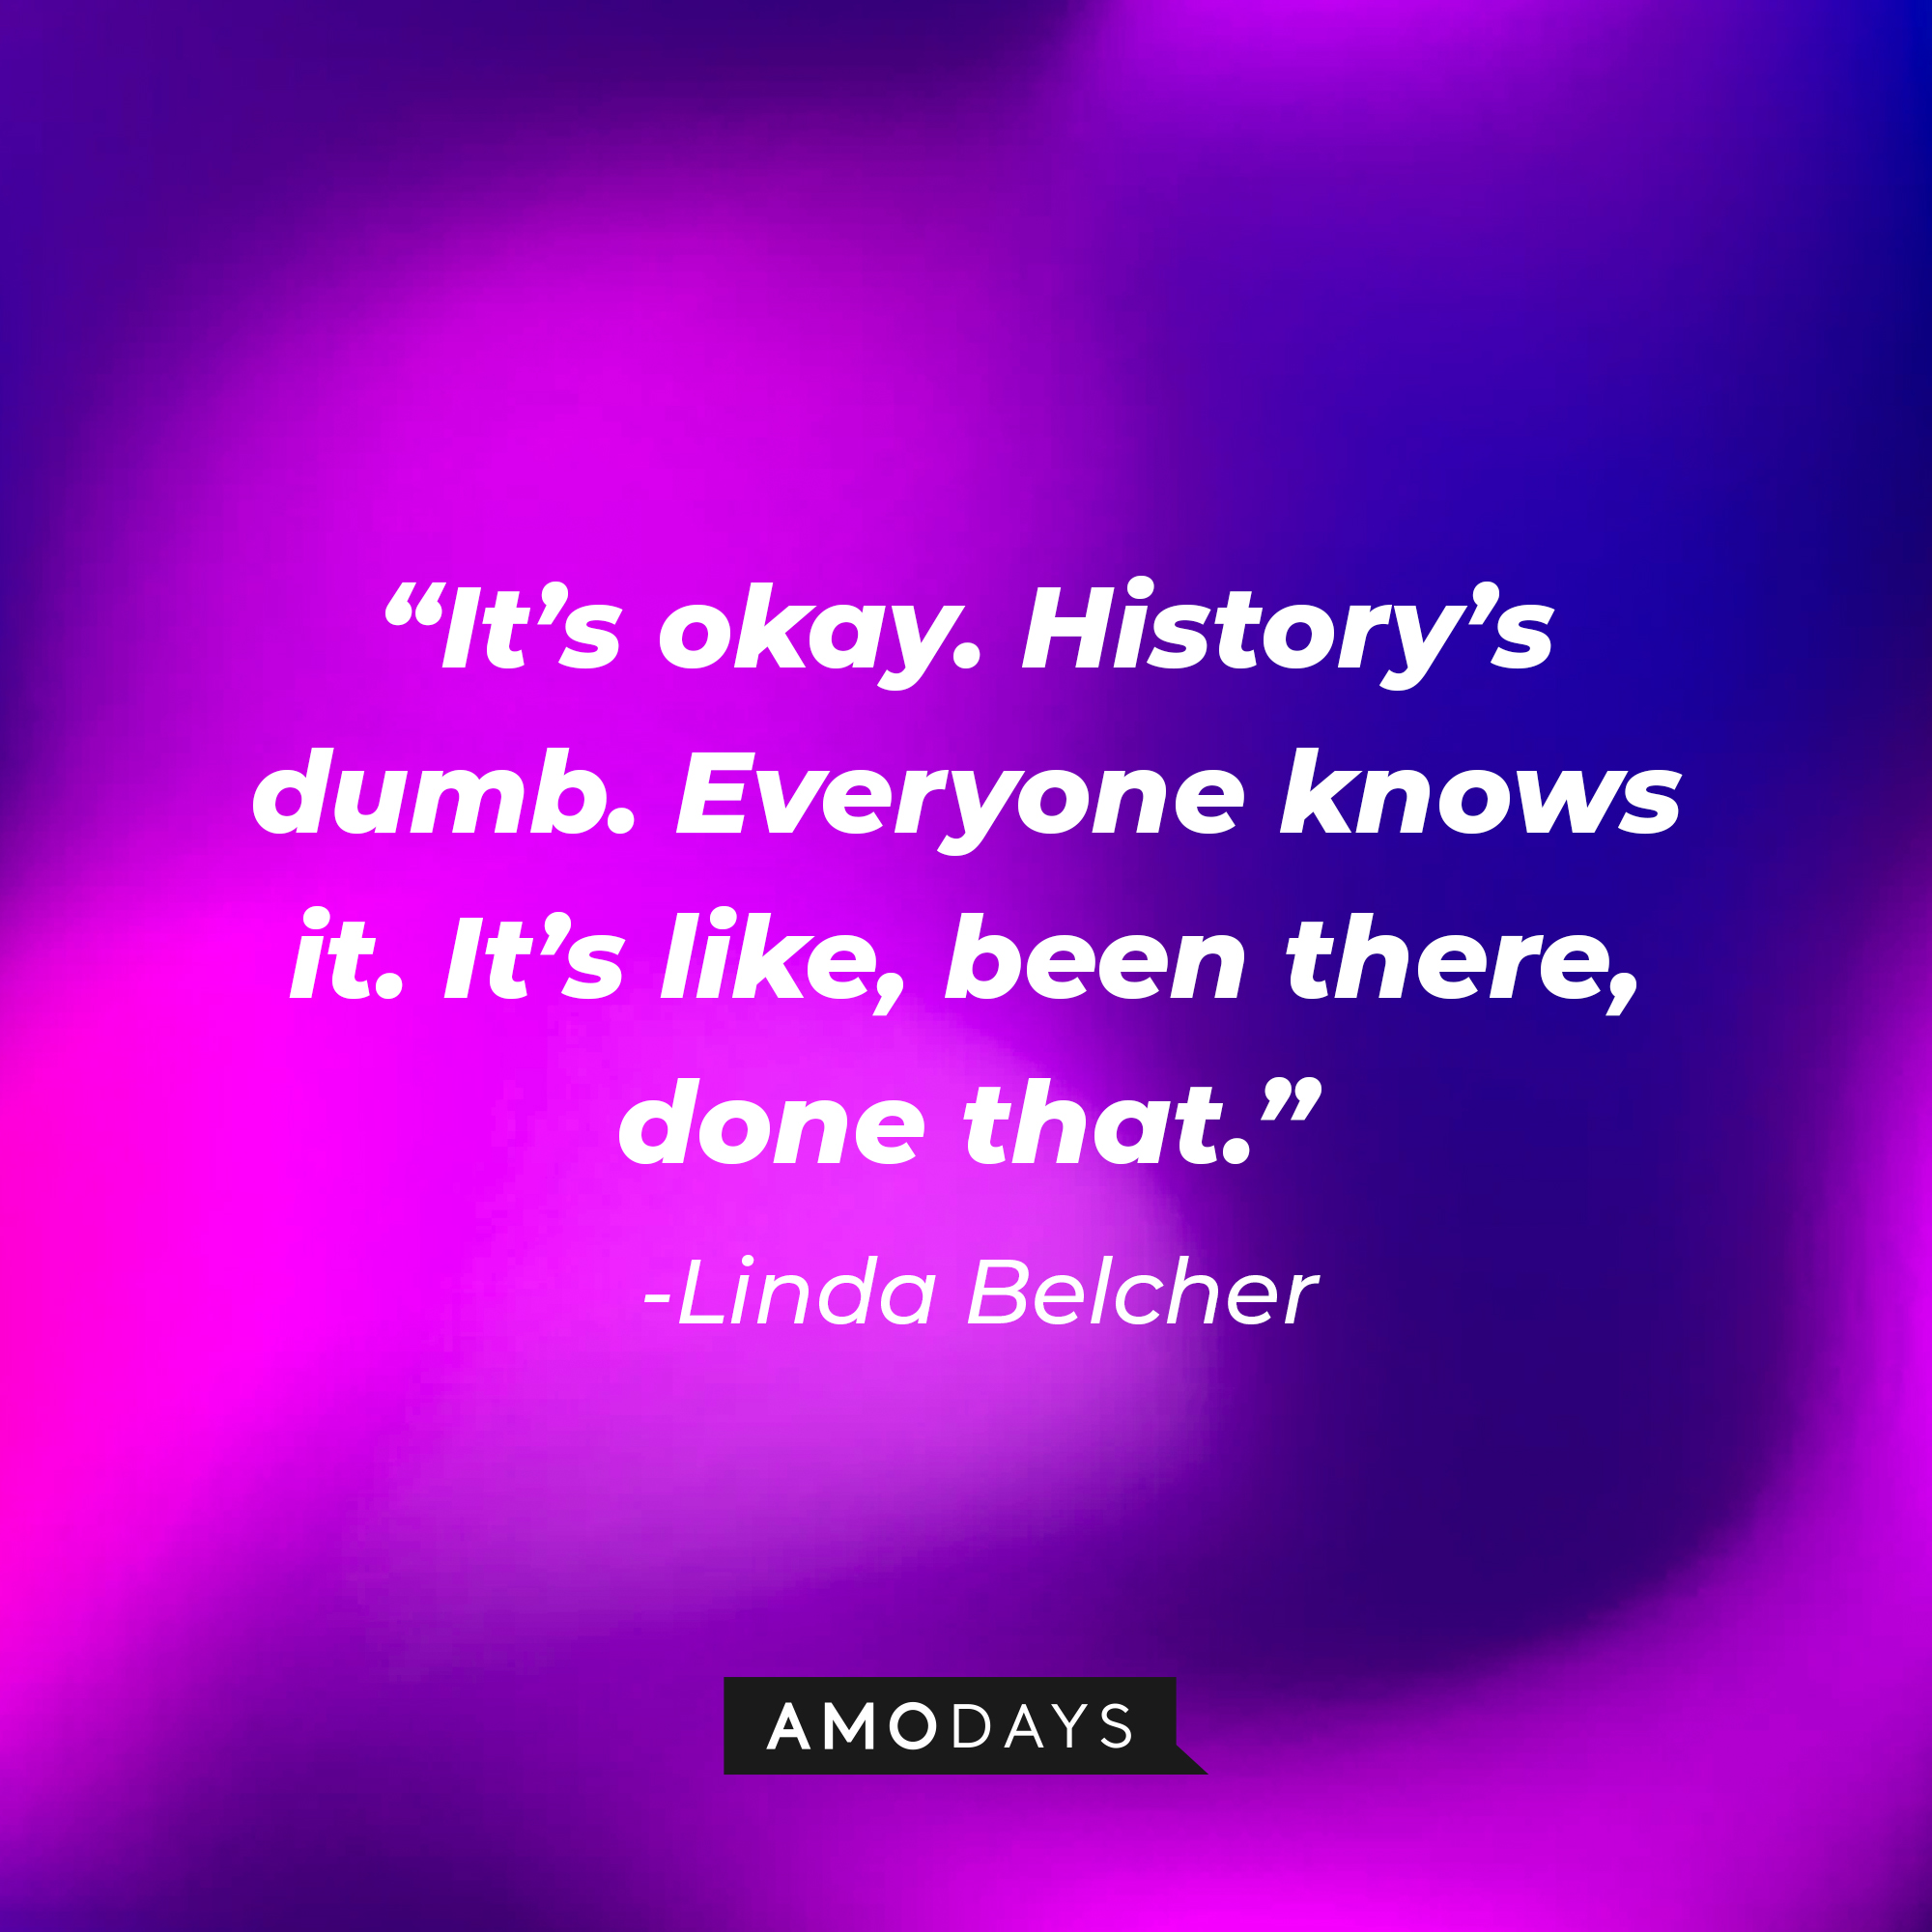 Linda Belcher’s quote:  “It’s okay. History’s dumb. Everyone knows it. It’s like, been there, done that.” | Source: AmoDays